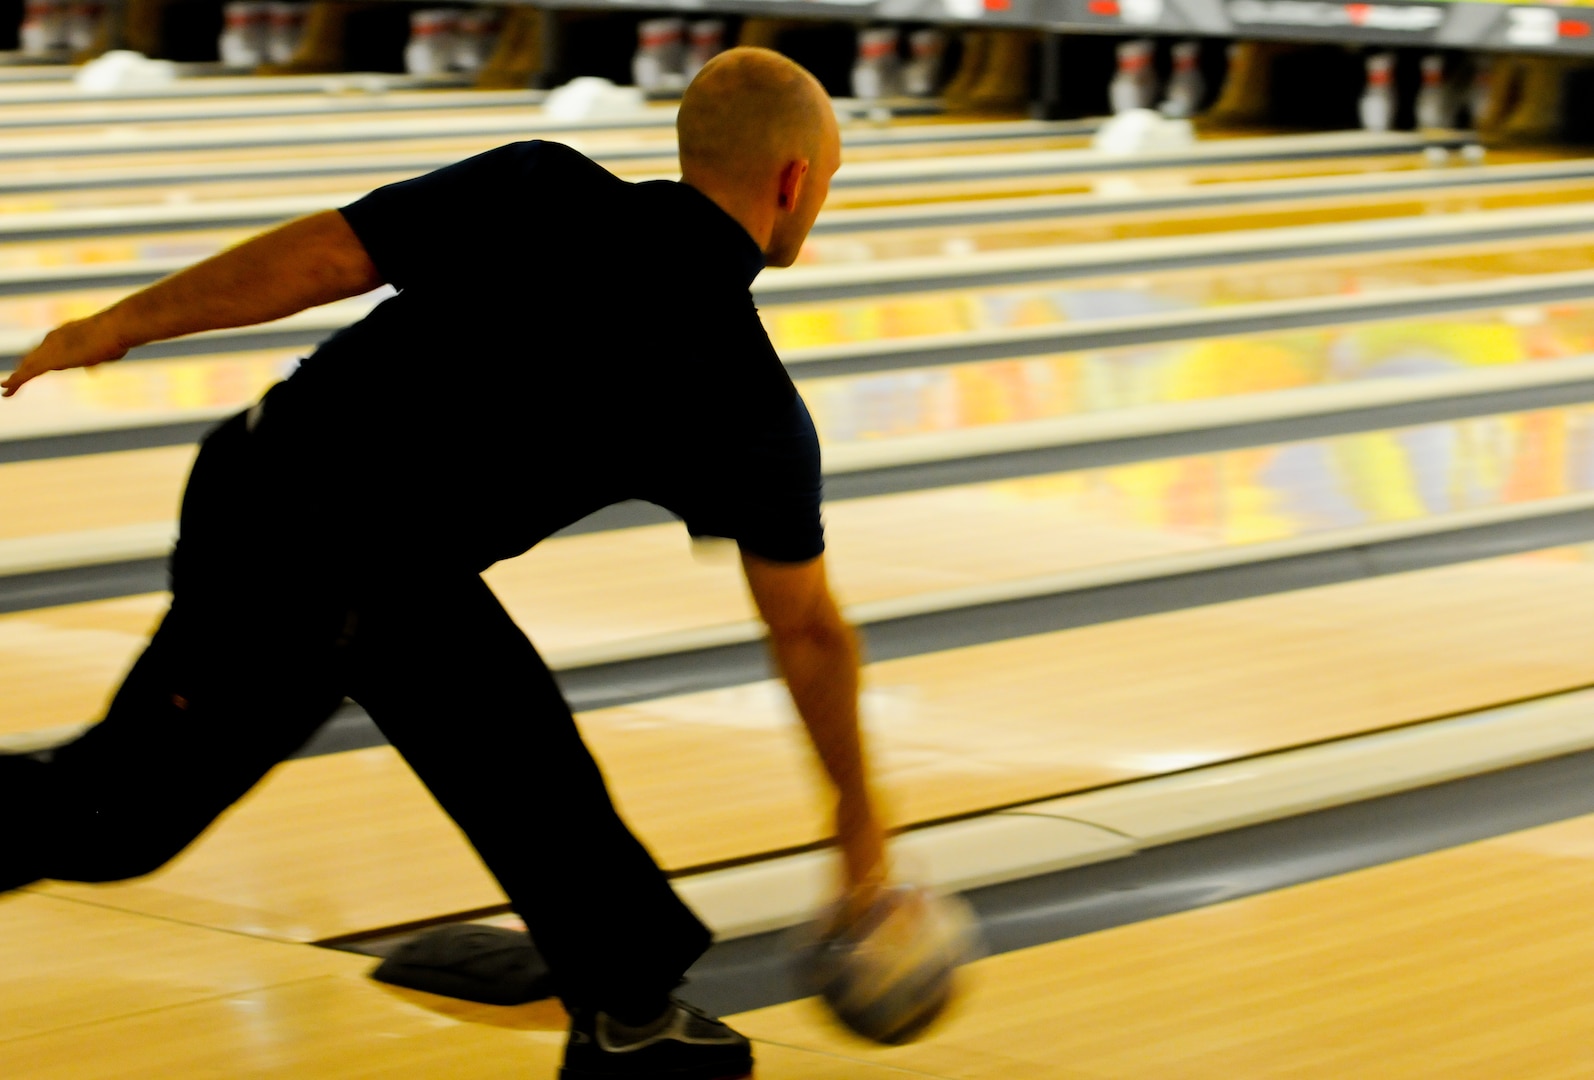 Air Force Staff Sgt. Kyle Wilkes, All-Air Force Bowling Team, competes against the All-Army and All-Navy Bowling Teams during the 2014 Armed Forces Bowling Championship at Joint Base Lewis-McChord, Wash., May 16.